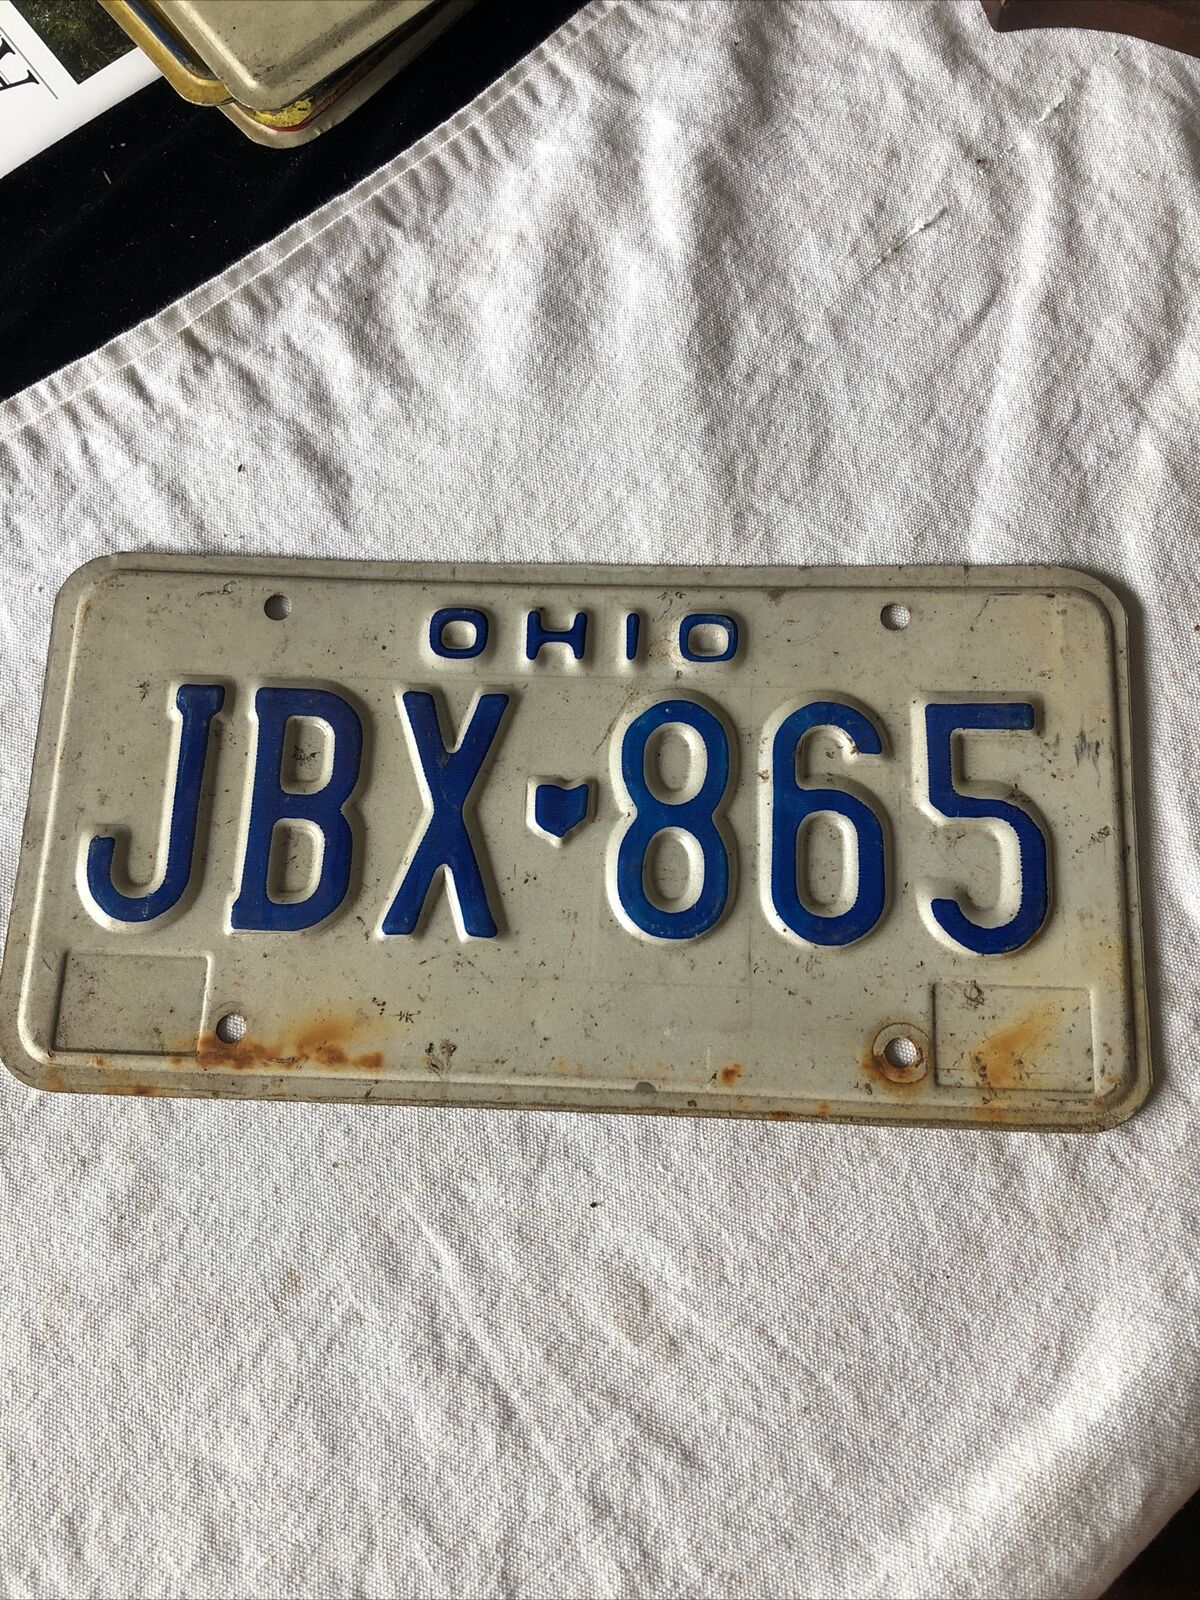 VINTAGE OHIO LICENSE PLATE JBX-865 No Dates Or Stickers Used?